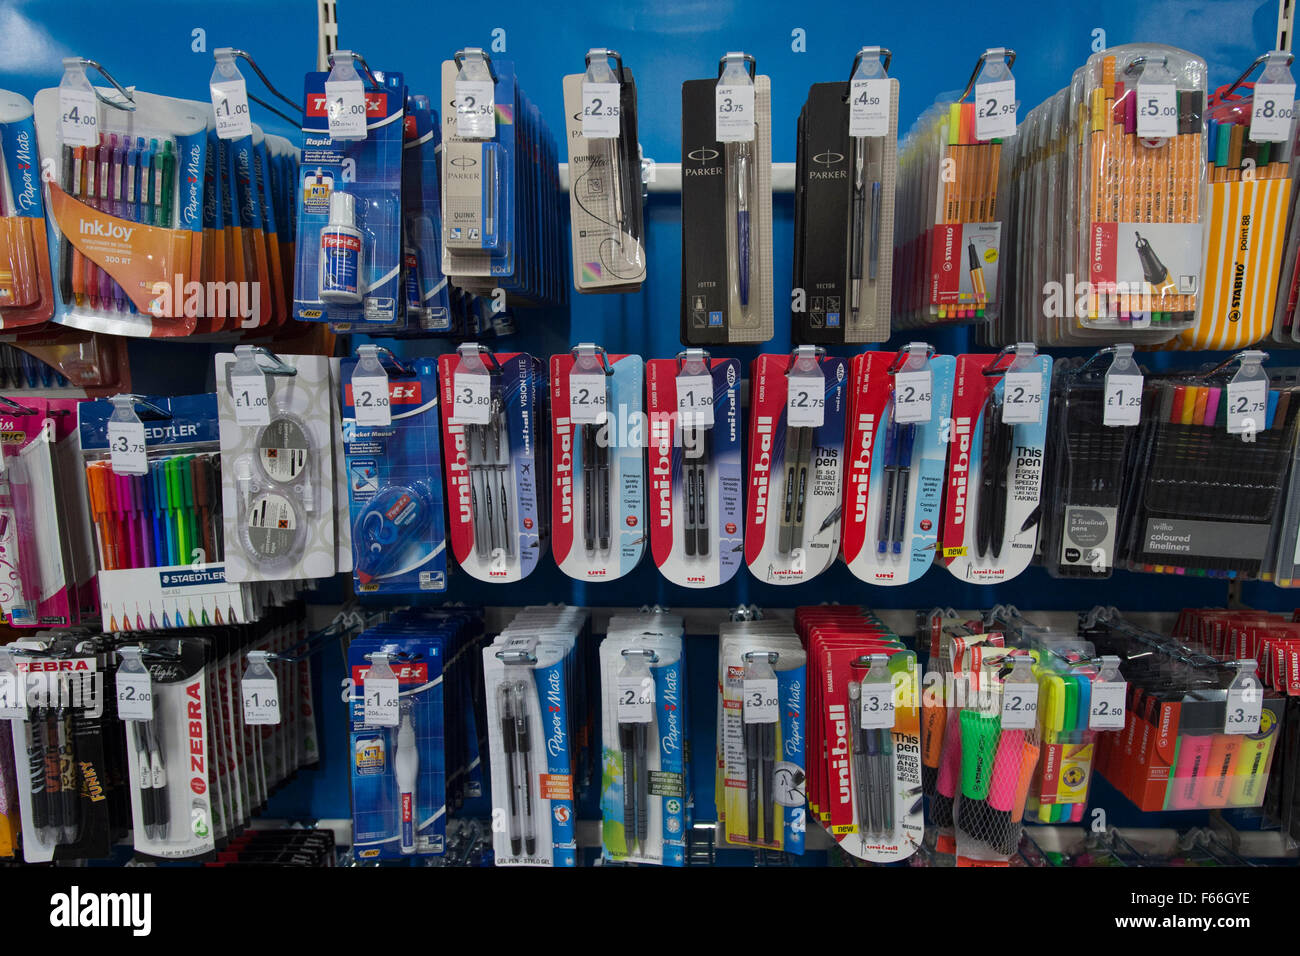 Stationary for sale in a back to school section of a supermarket. Stock Photo